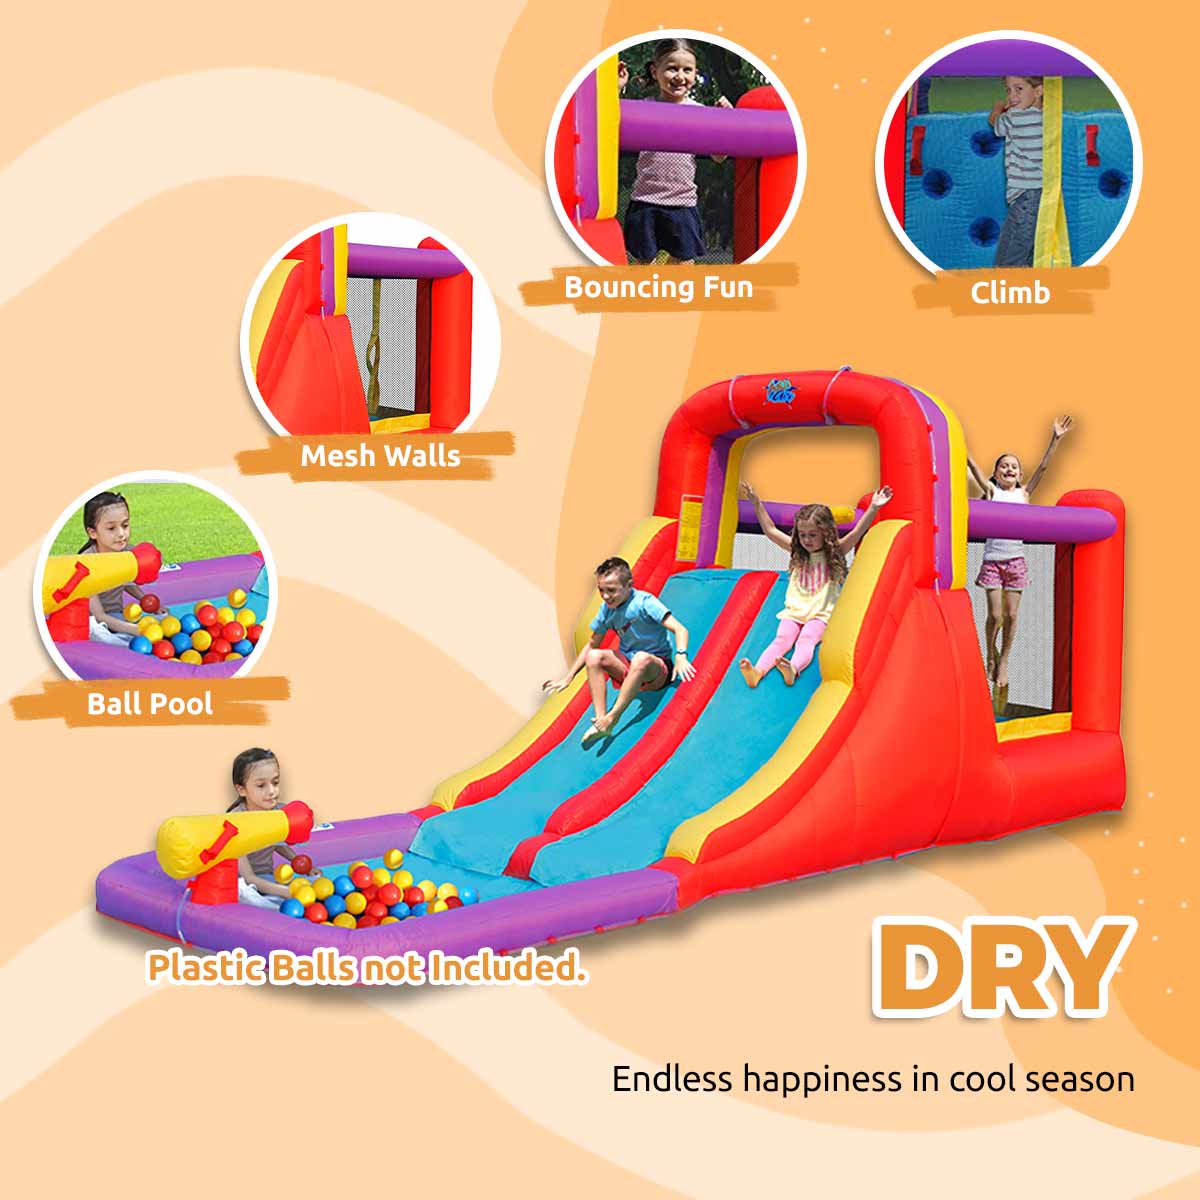 Dry use - Inflatable Water Slide Bounce House with Double Blow Up Slides